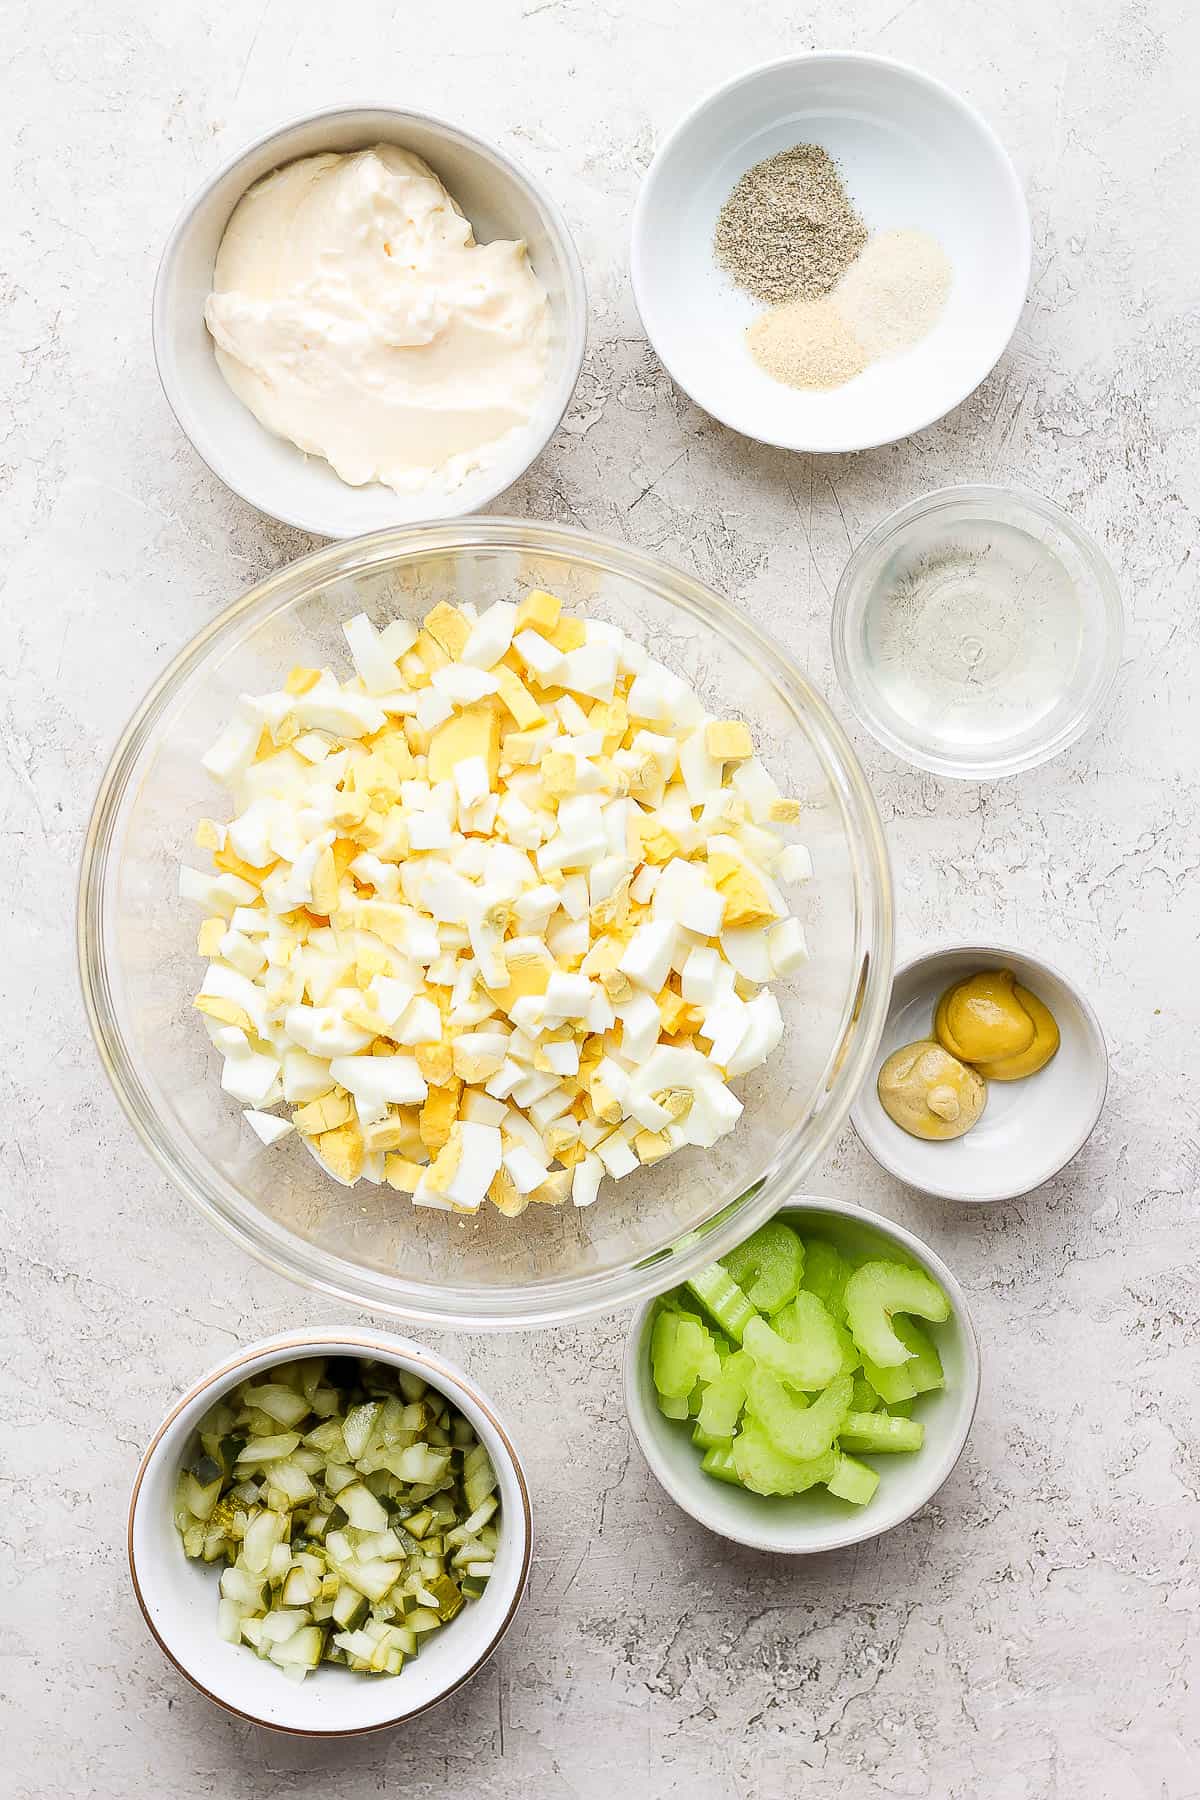 Ingredients for egg salad in separate dishes.